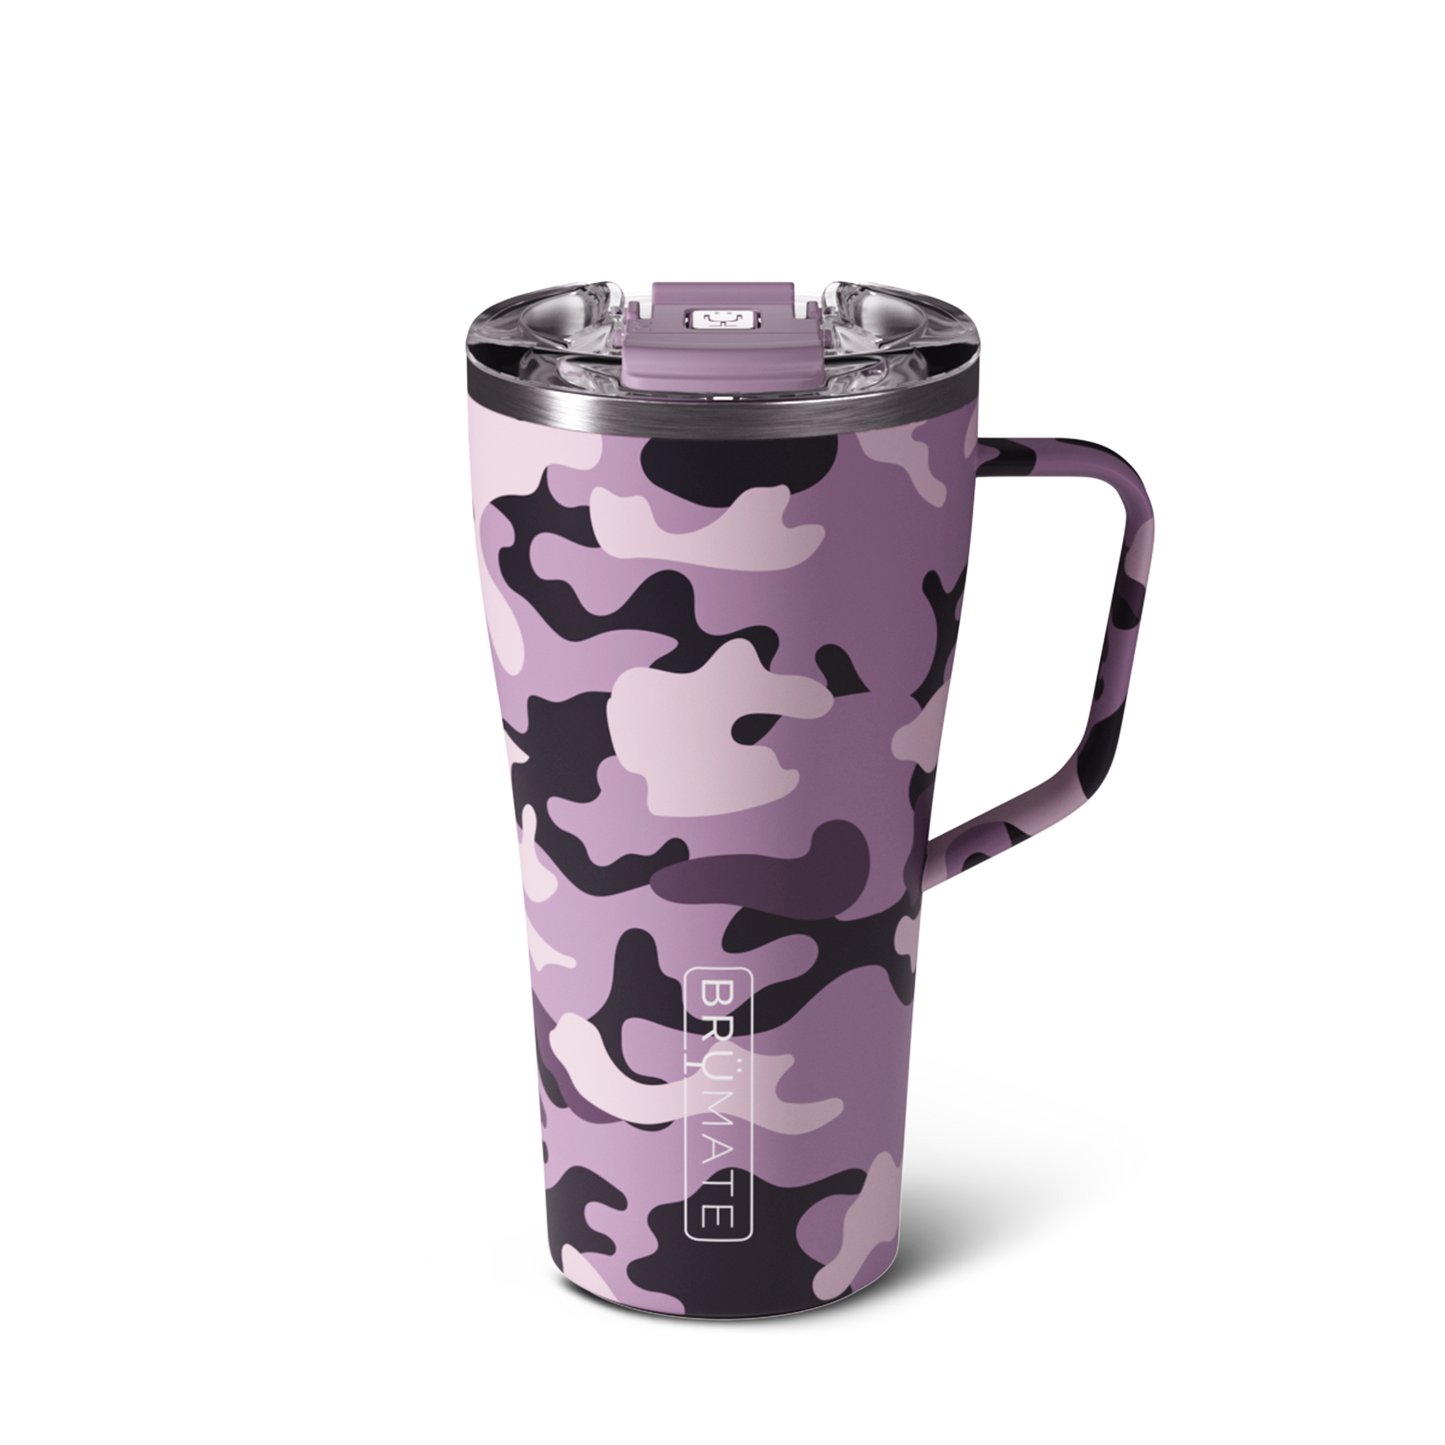 22 ounce mauve camo toddy on a white background